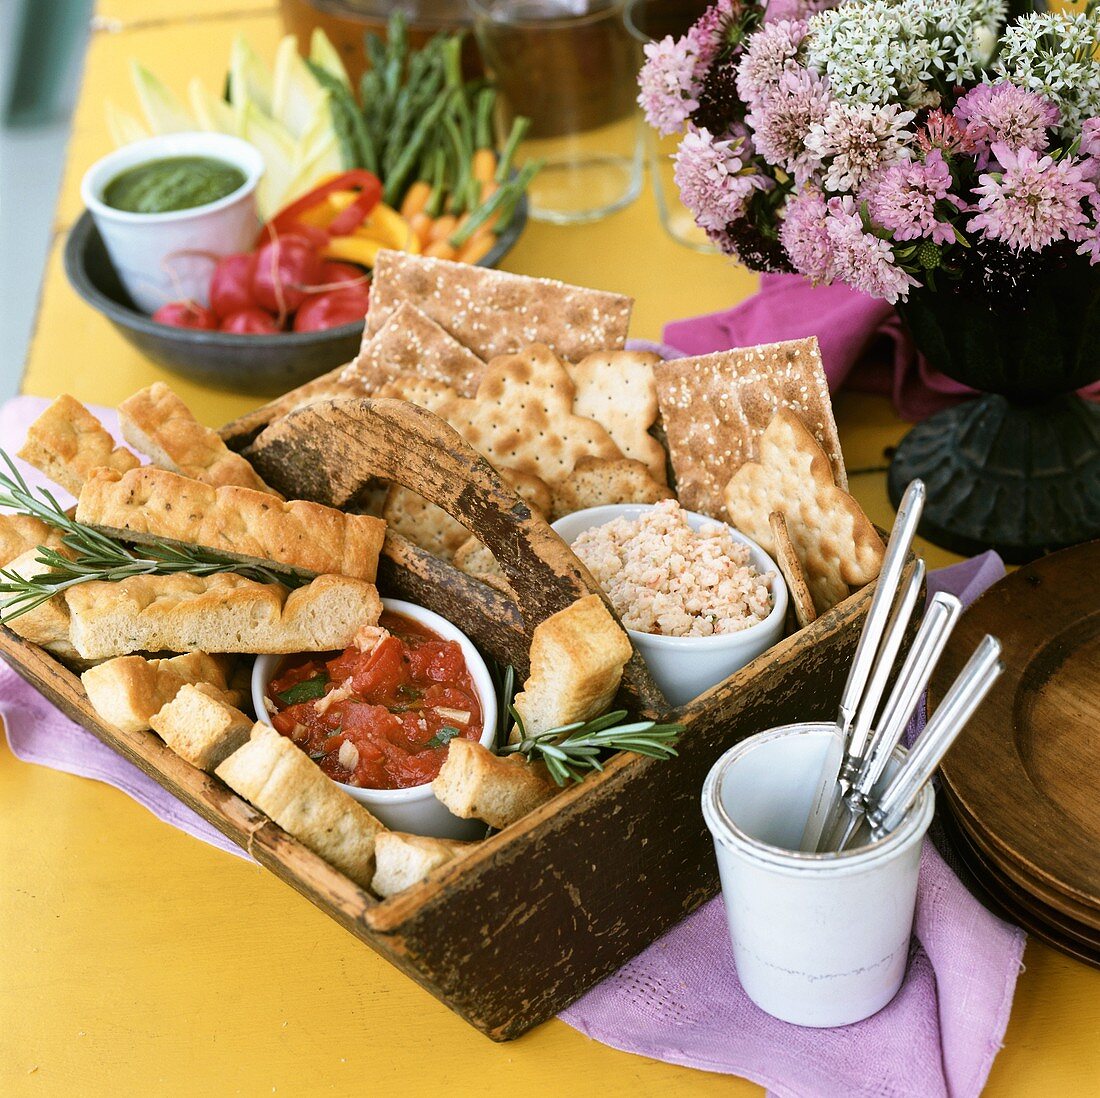 Focaccia with tomato dip and crackers with seafood dip